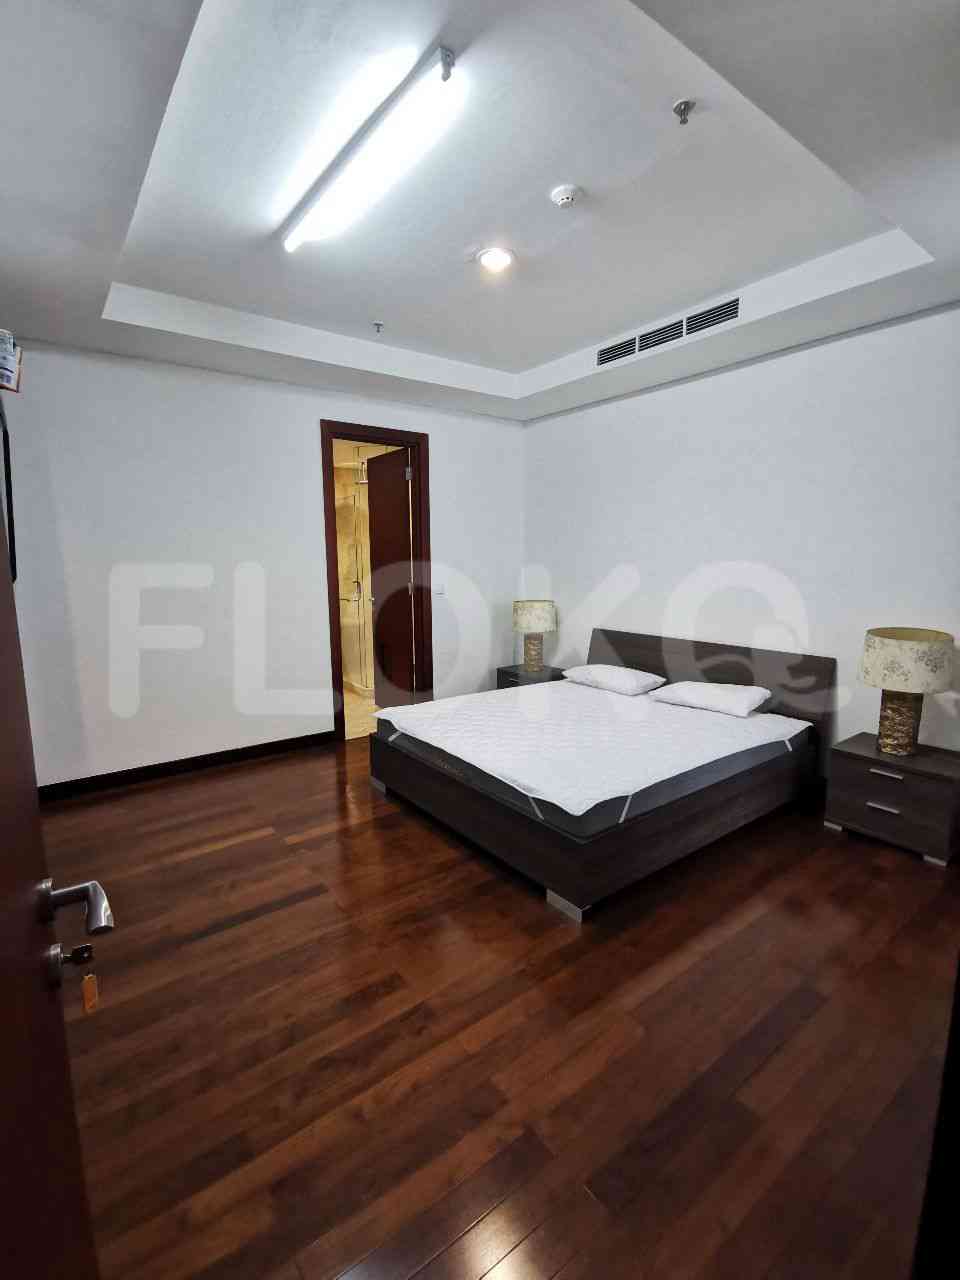 4 Bedroom on 7th Floor for Rent in Essence Darmawangsa Apartment - fci672 2